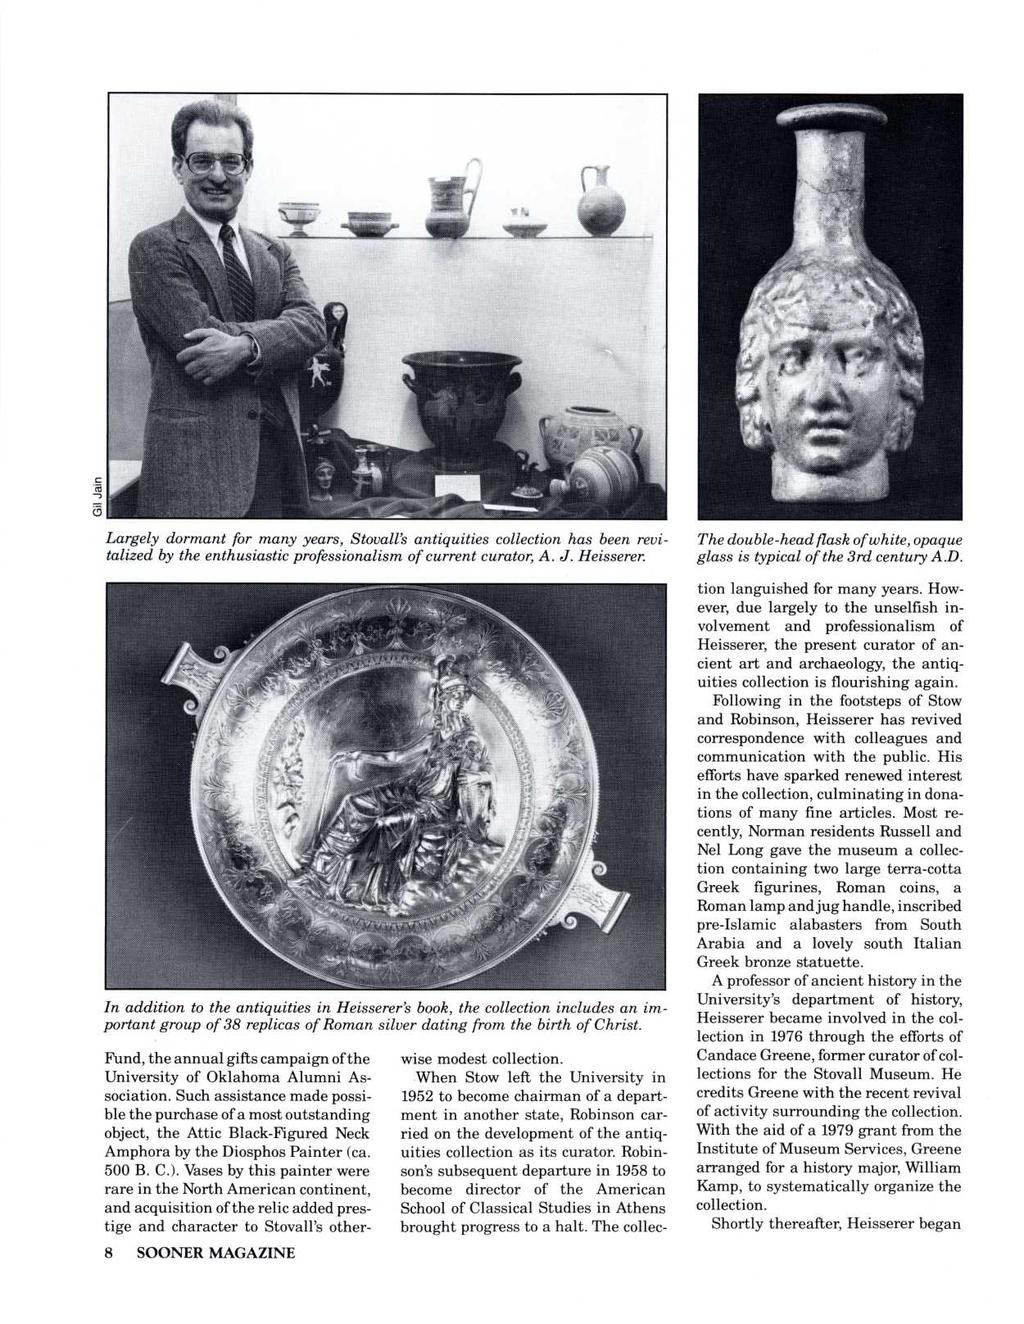 Largely dormant for many years, Stovall's antiquities collection has been revitalized by the enthusiastic professionalism of current curator, A. J. Heisserer.